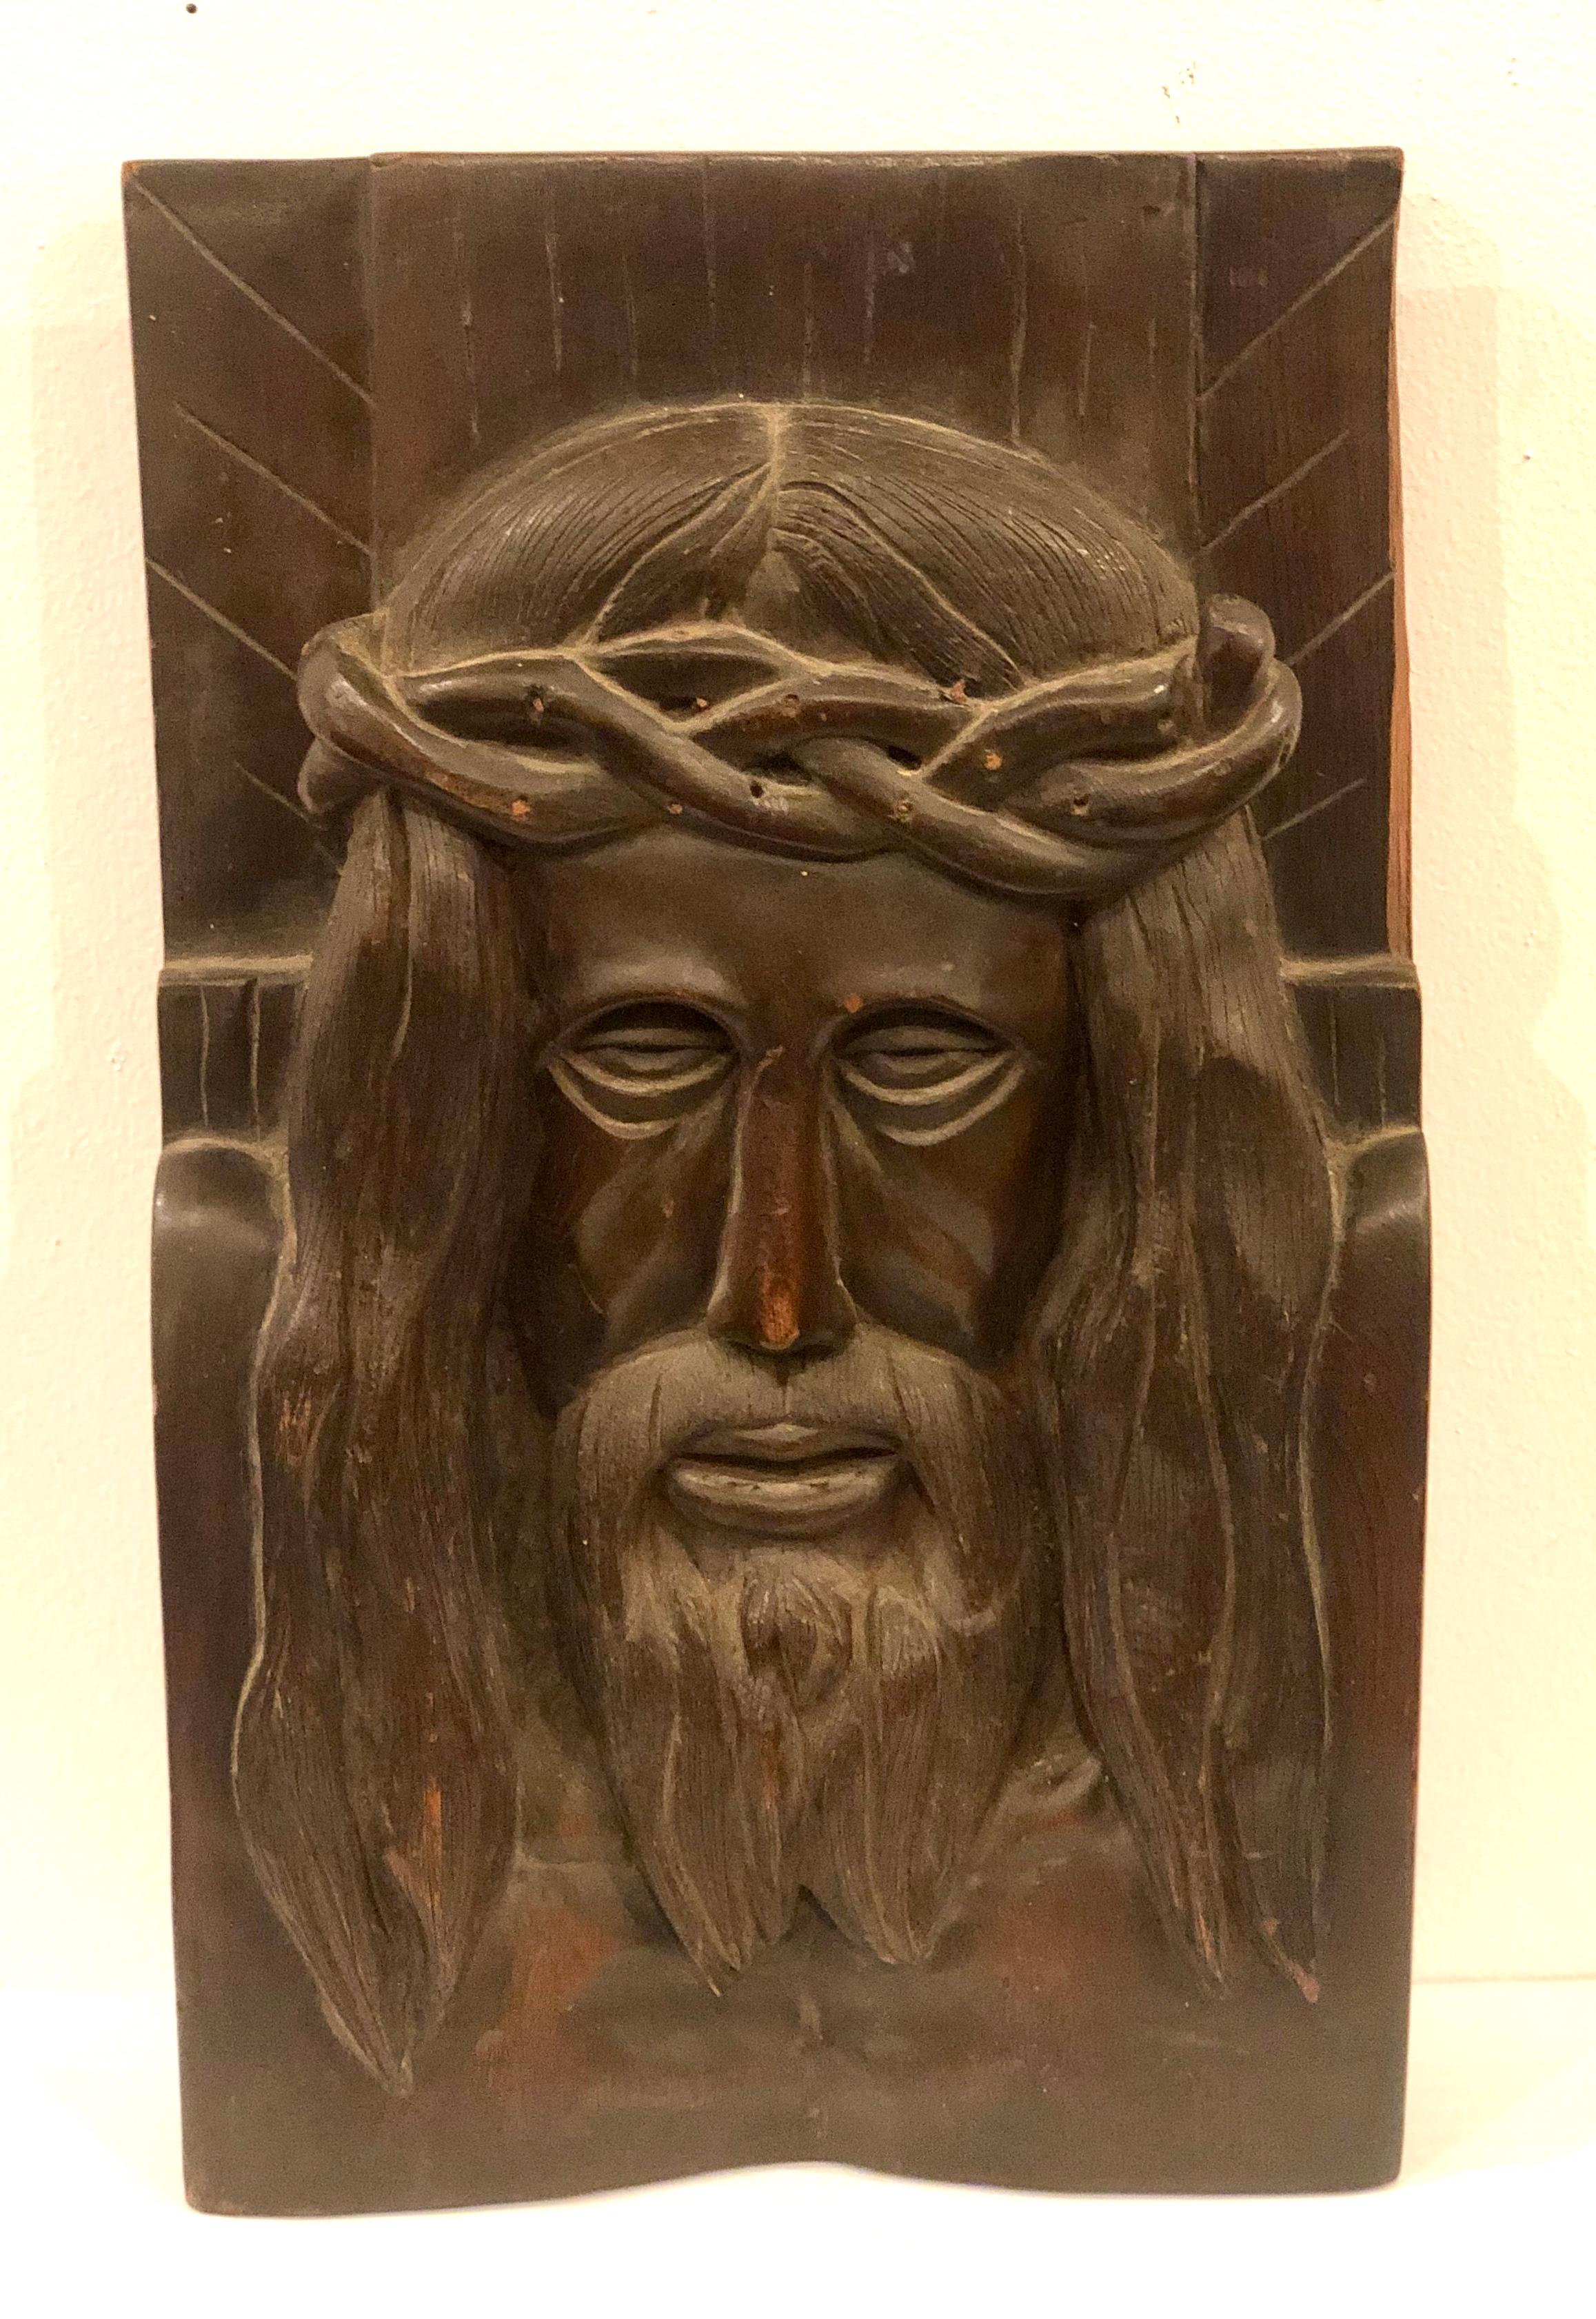 Hand carved solid wood Jesus Christ face wall plaque sculpture, circa 1970s not signed beautiful piece wall relief, sculpture hand carved great detail. Original finish natural patina we only oiled the item.